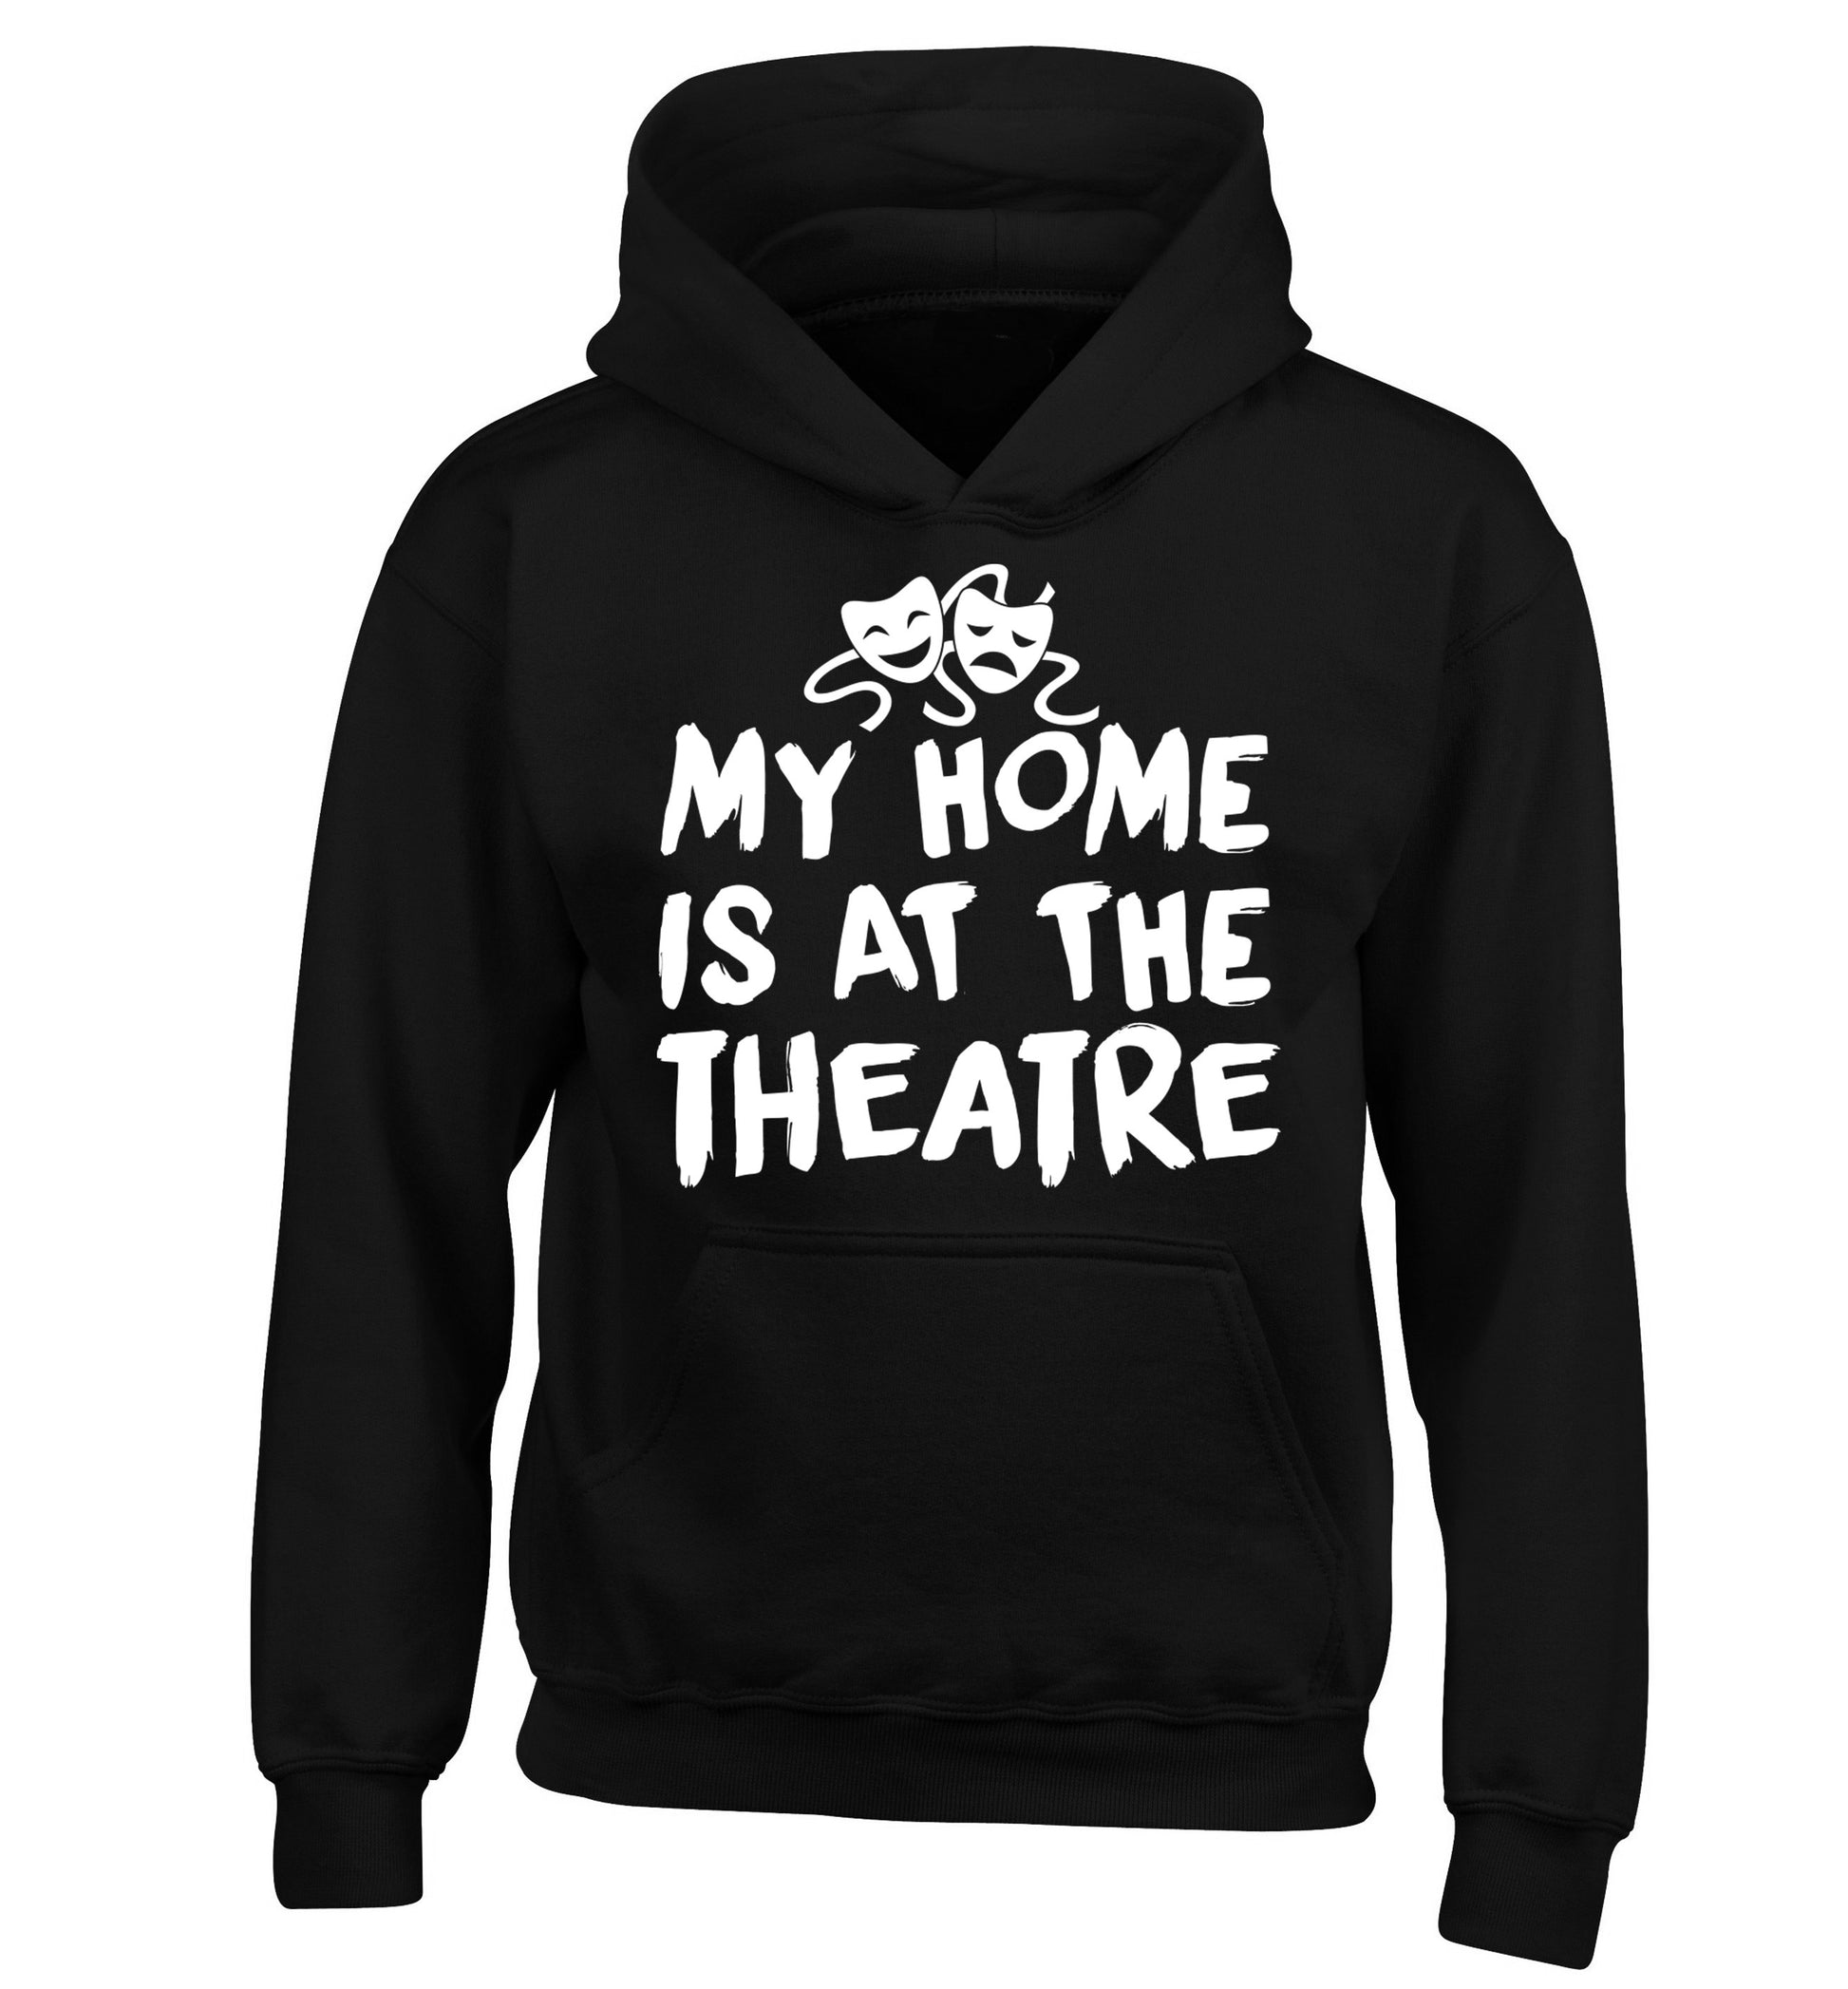 My home is at the theatre children's black hoodie 12-14 Years